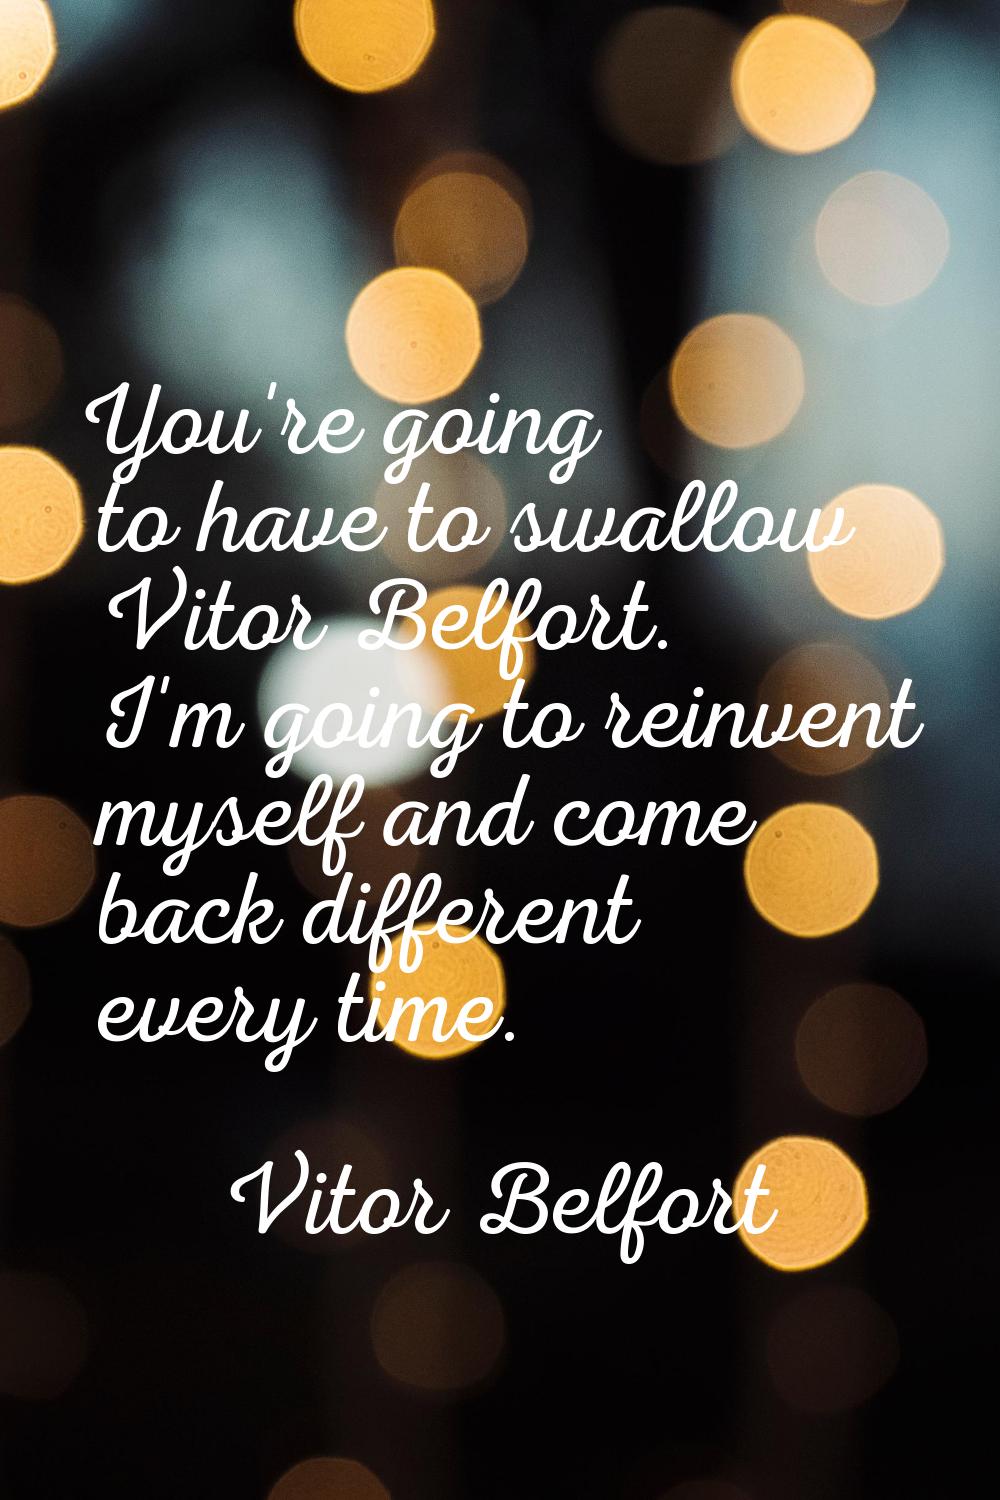 You're going to have to swallow Vitor Belfort. I'm going to reinvent myself and come back different